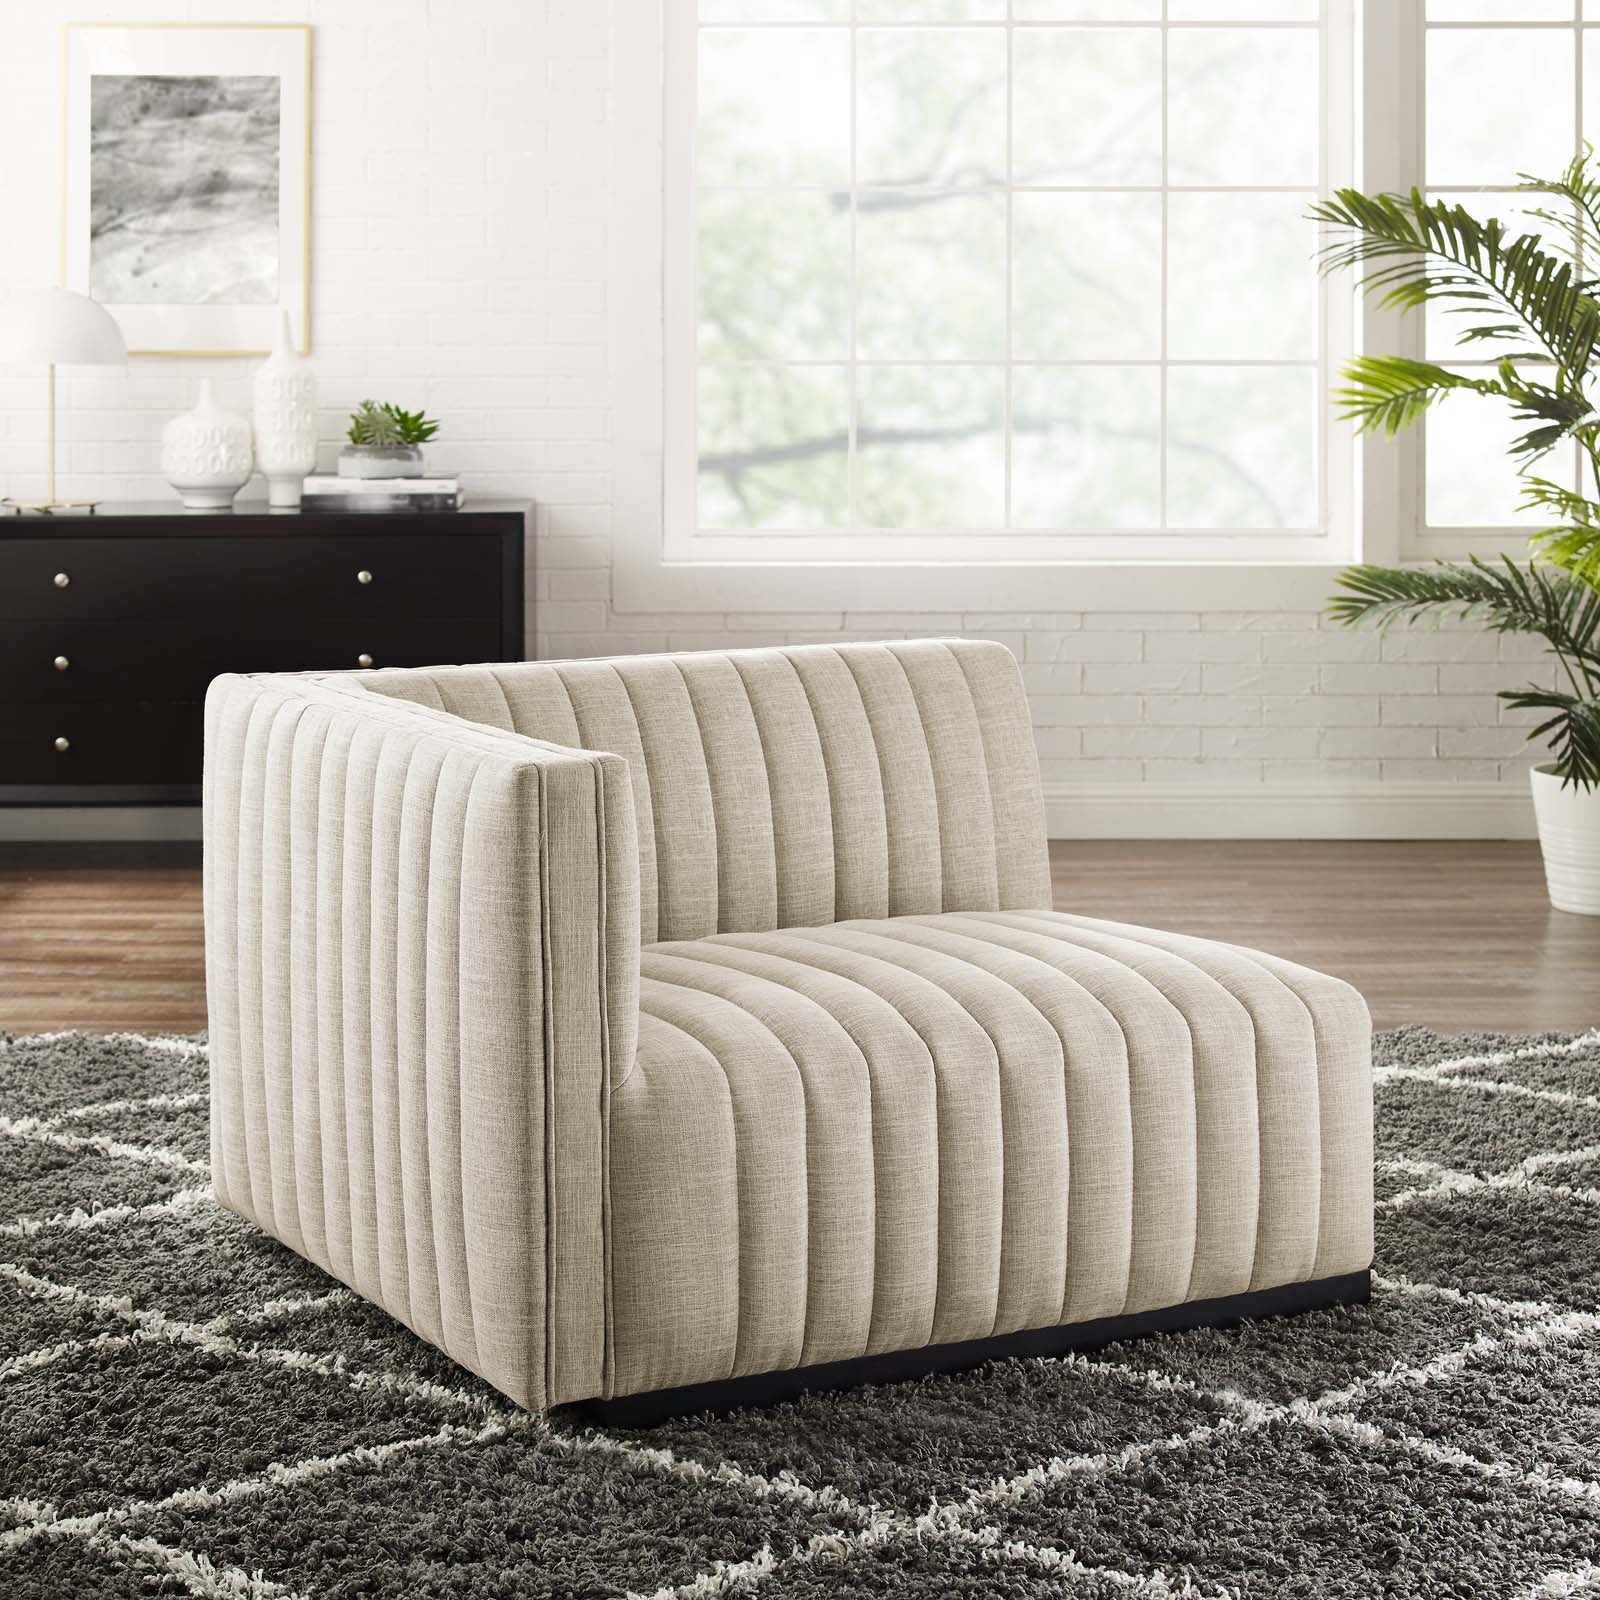 Modway Accent Chairs - Conjure Channel Tufted Upholstered Fabric Left-Arm Chair Black Beige